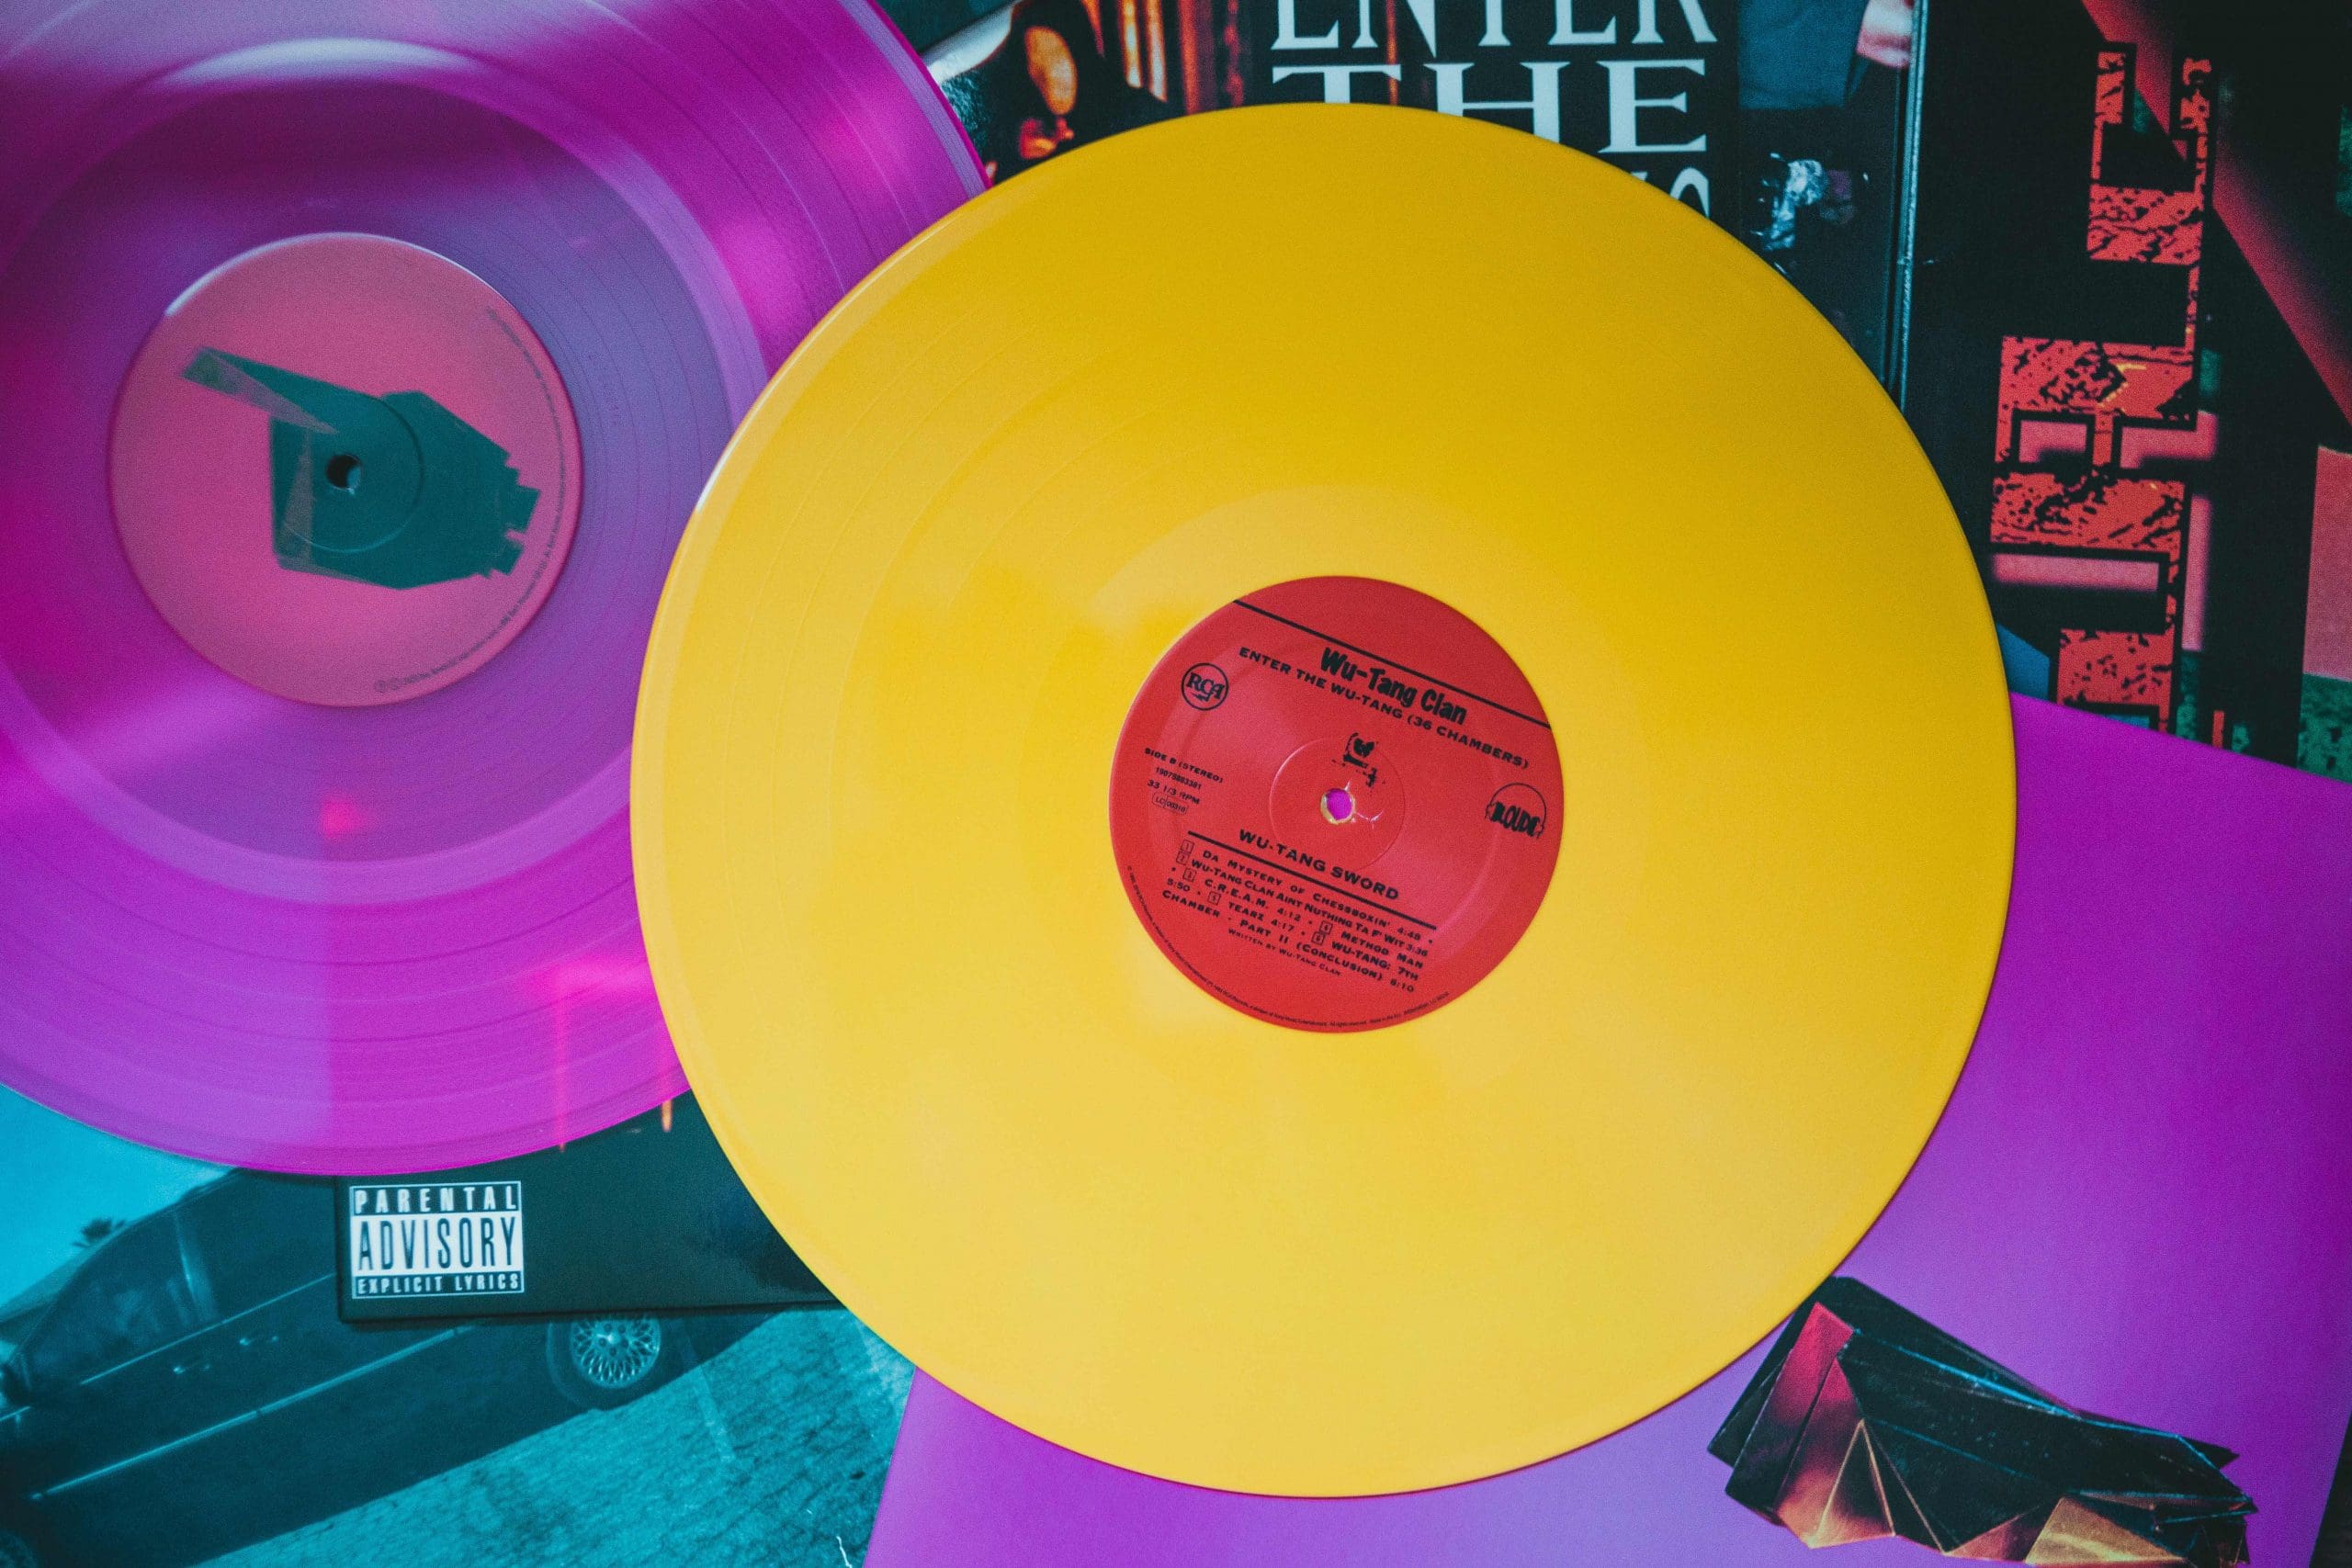 Colourful vinyl covers